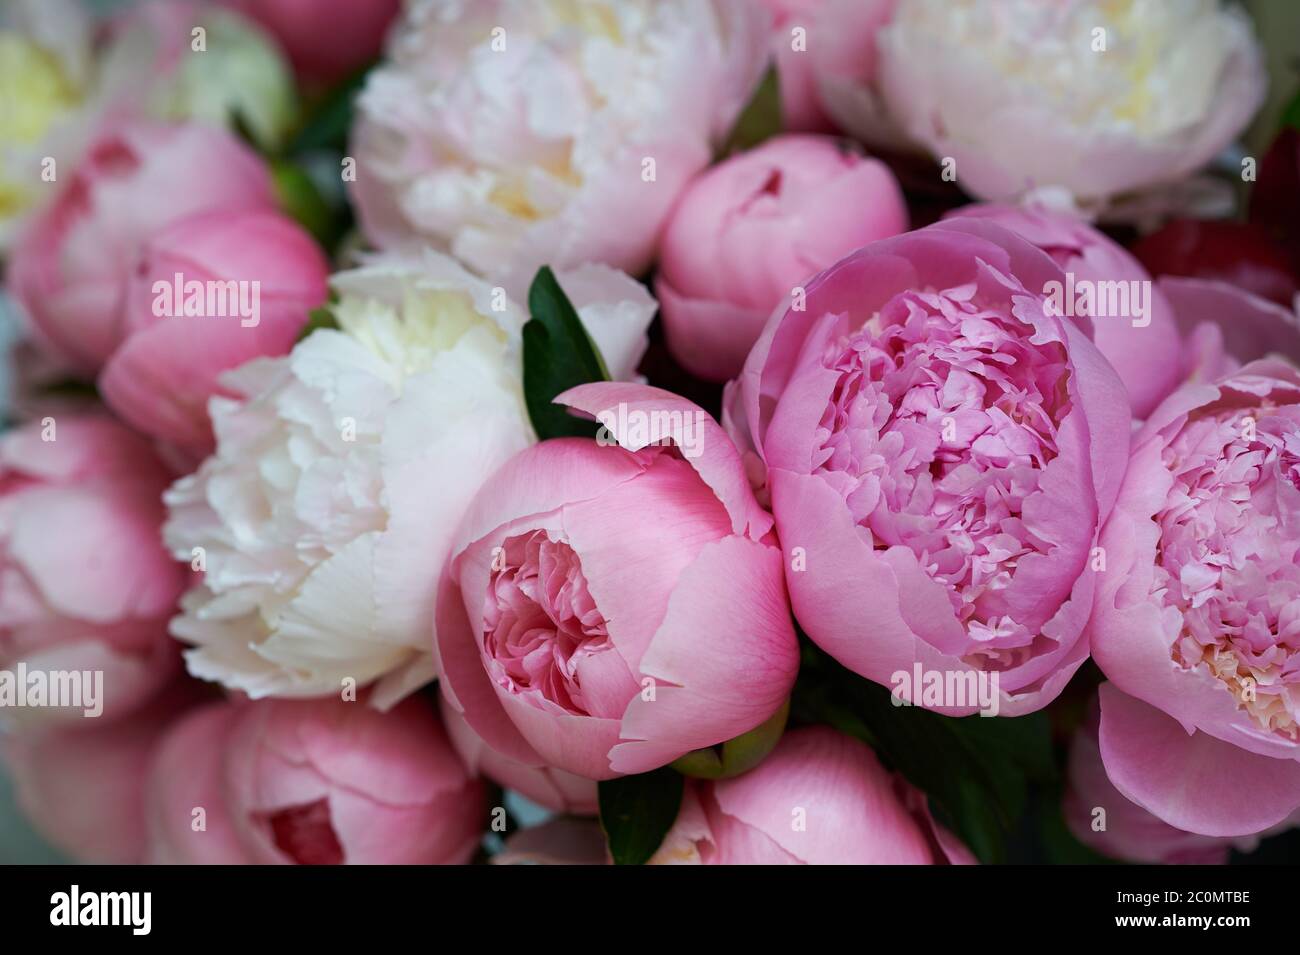 Background with beautiful white and pink flowers peonies. Stock Photo